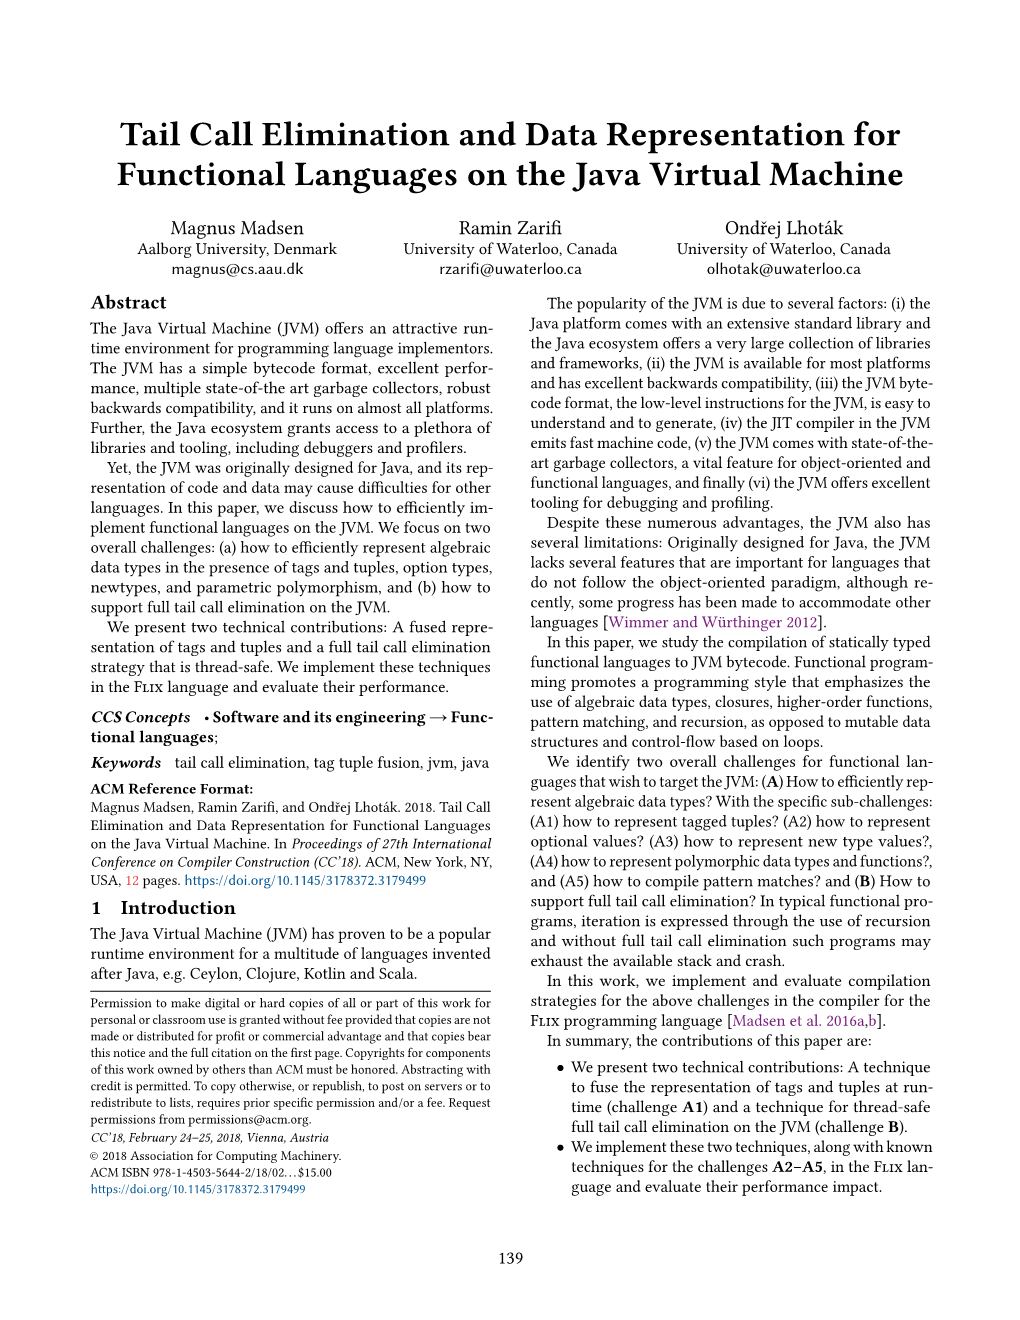 Tail Call Elimination and Data Representation for Functional Languages on the Java Virtual Machine